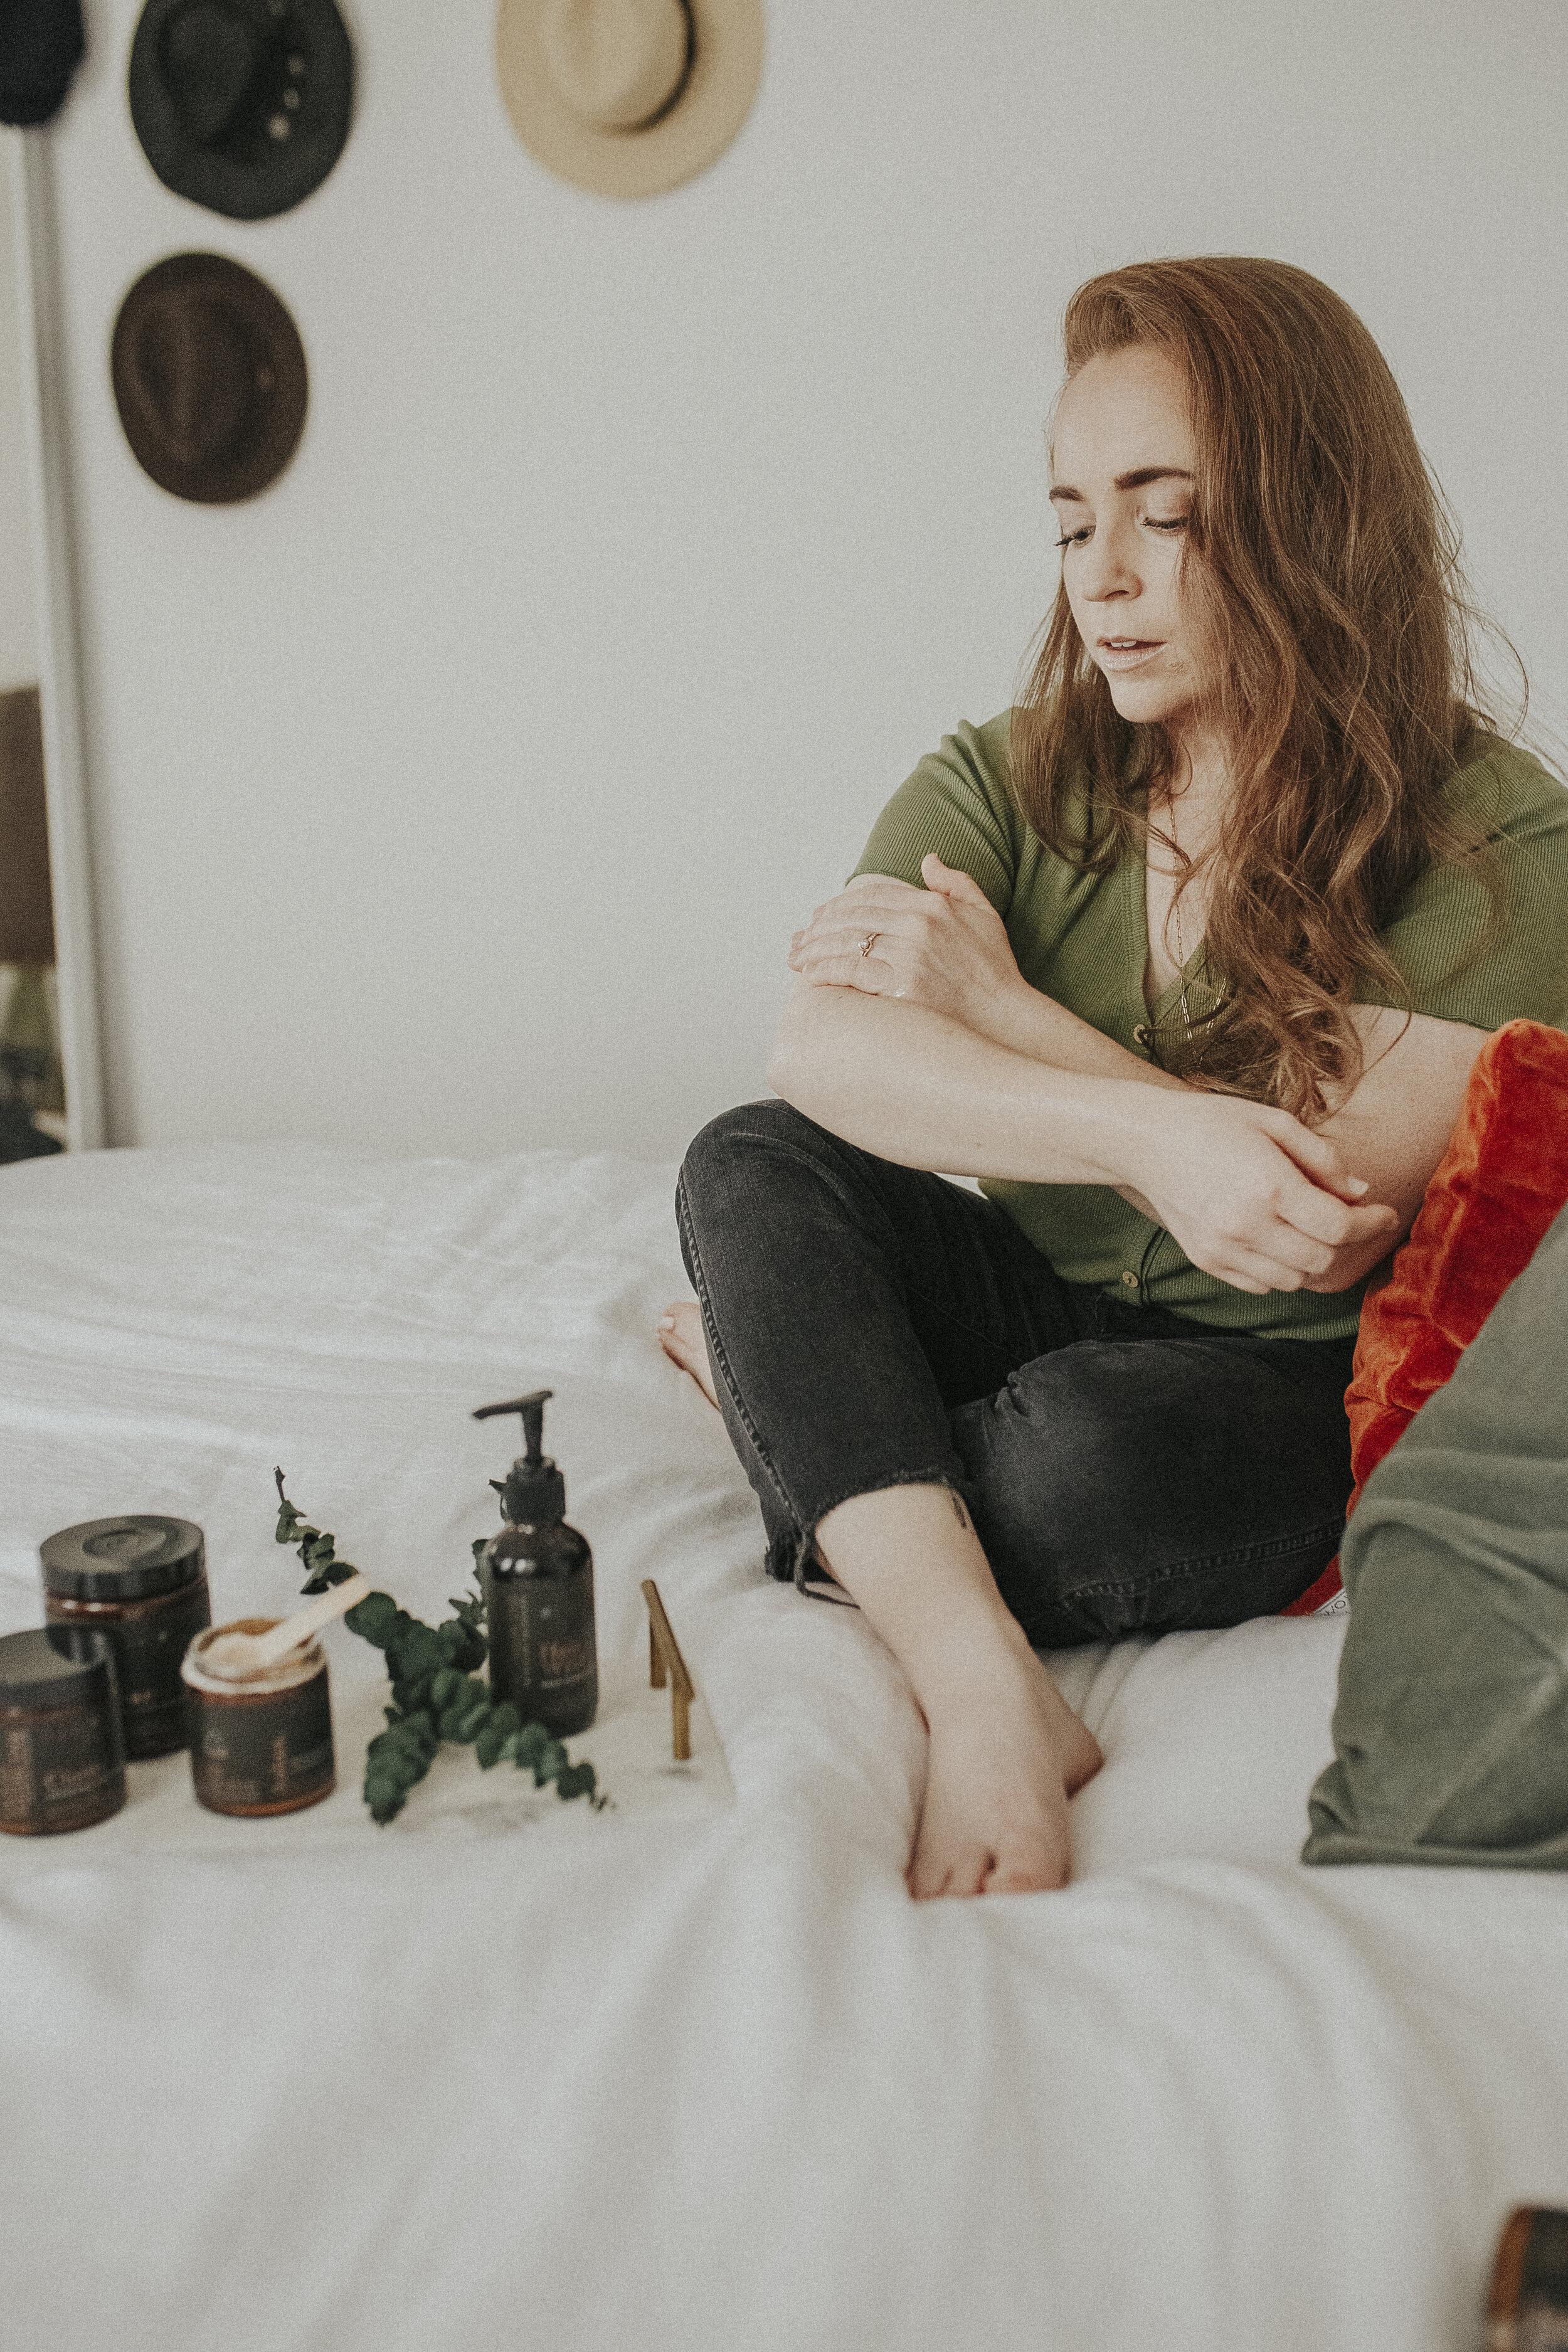  I begin by gently dry brushing my entire body, in long strokes, starting on the outside (toes and fingers) and working towards my heart. Next, I follow it up with an oil bath, where I use the    Holy Wild Body Oil    to nourish and moisturize my ski